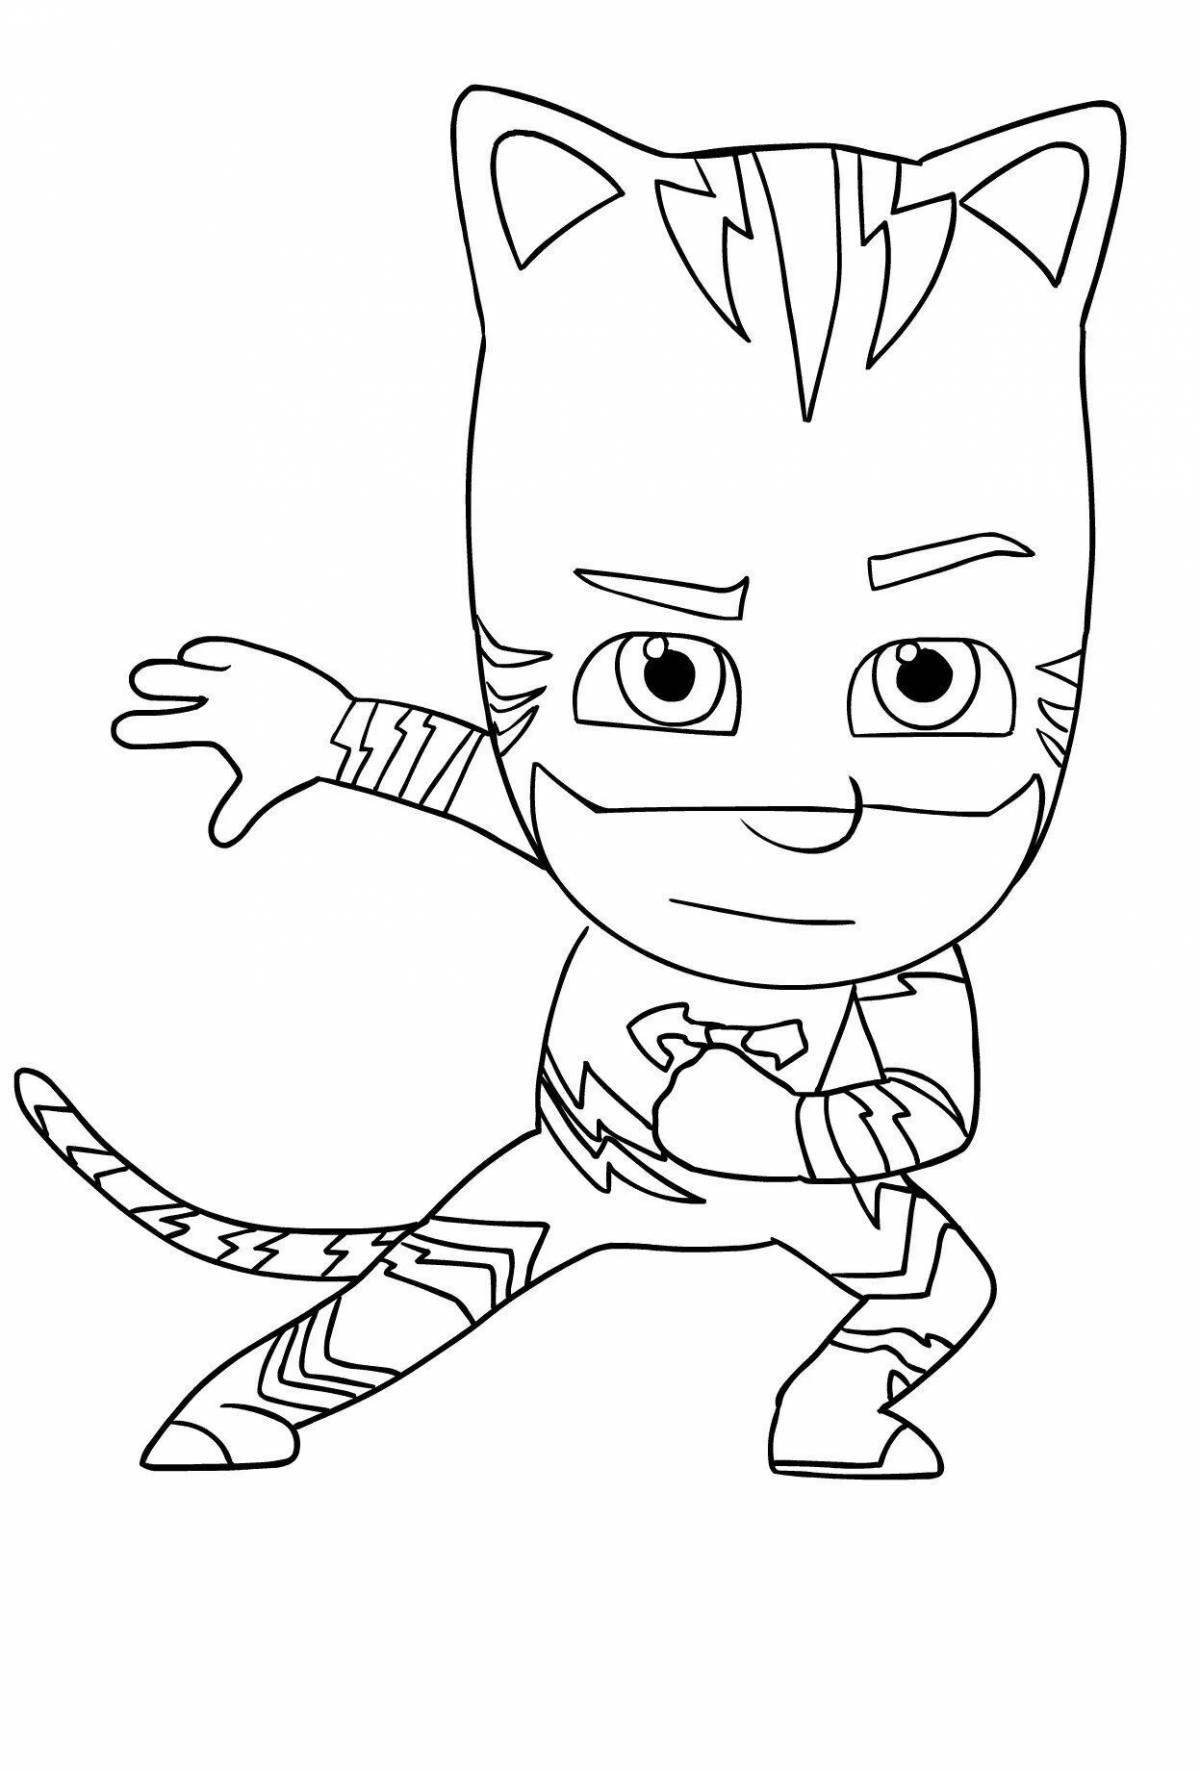 Coloring page funny masked characters